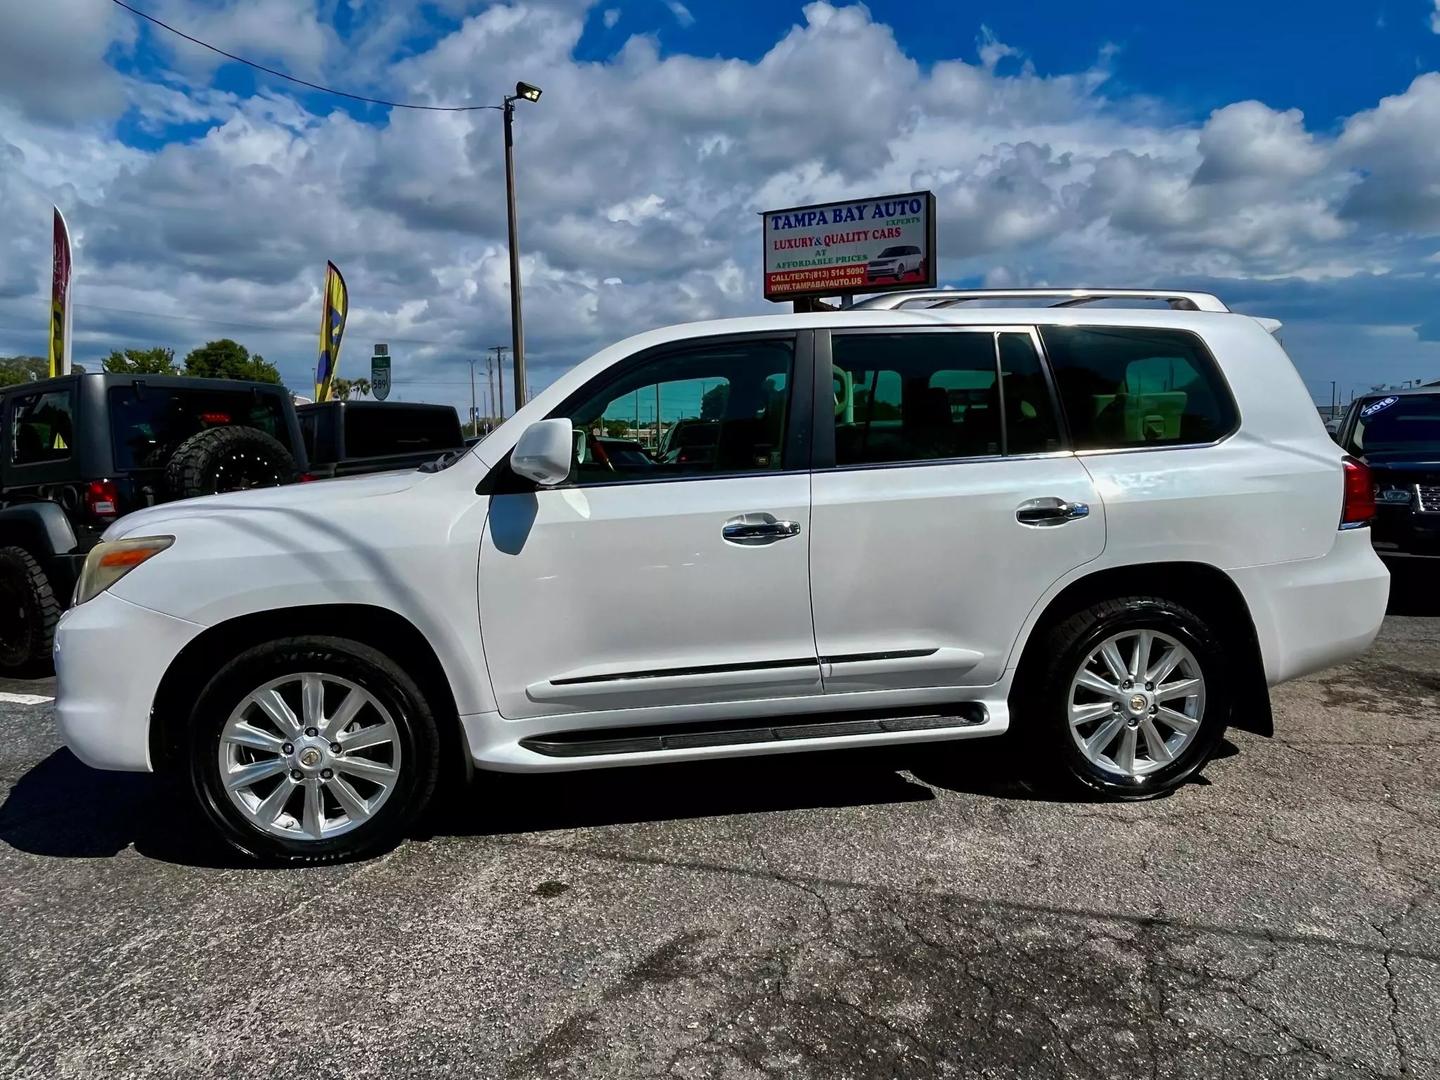 Used 2008 Lexus LX 570 with VIN JTJHY00W884005450 for sale in Tampa, FL